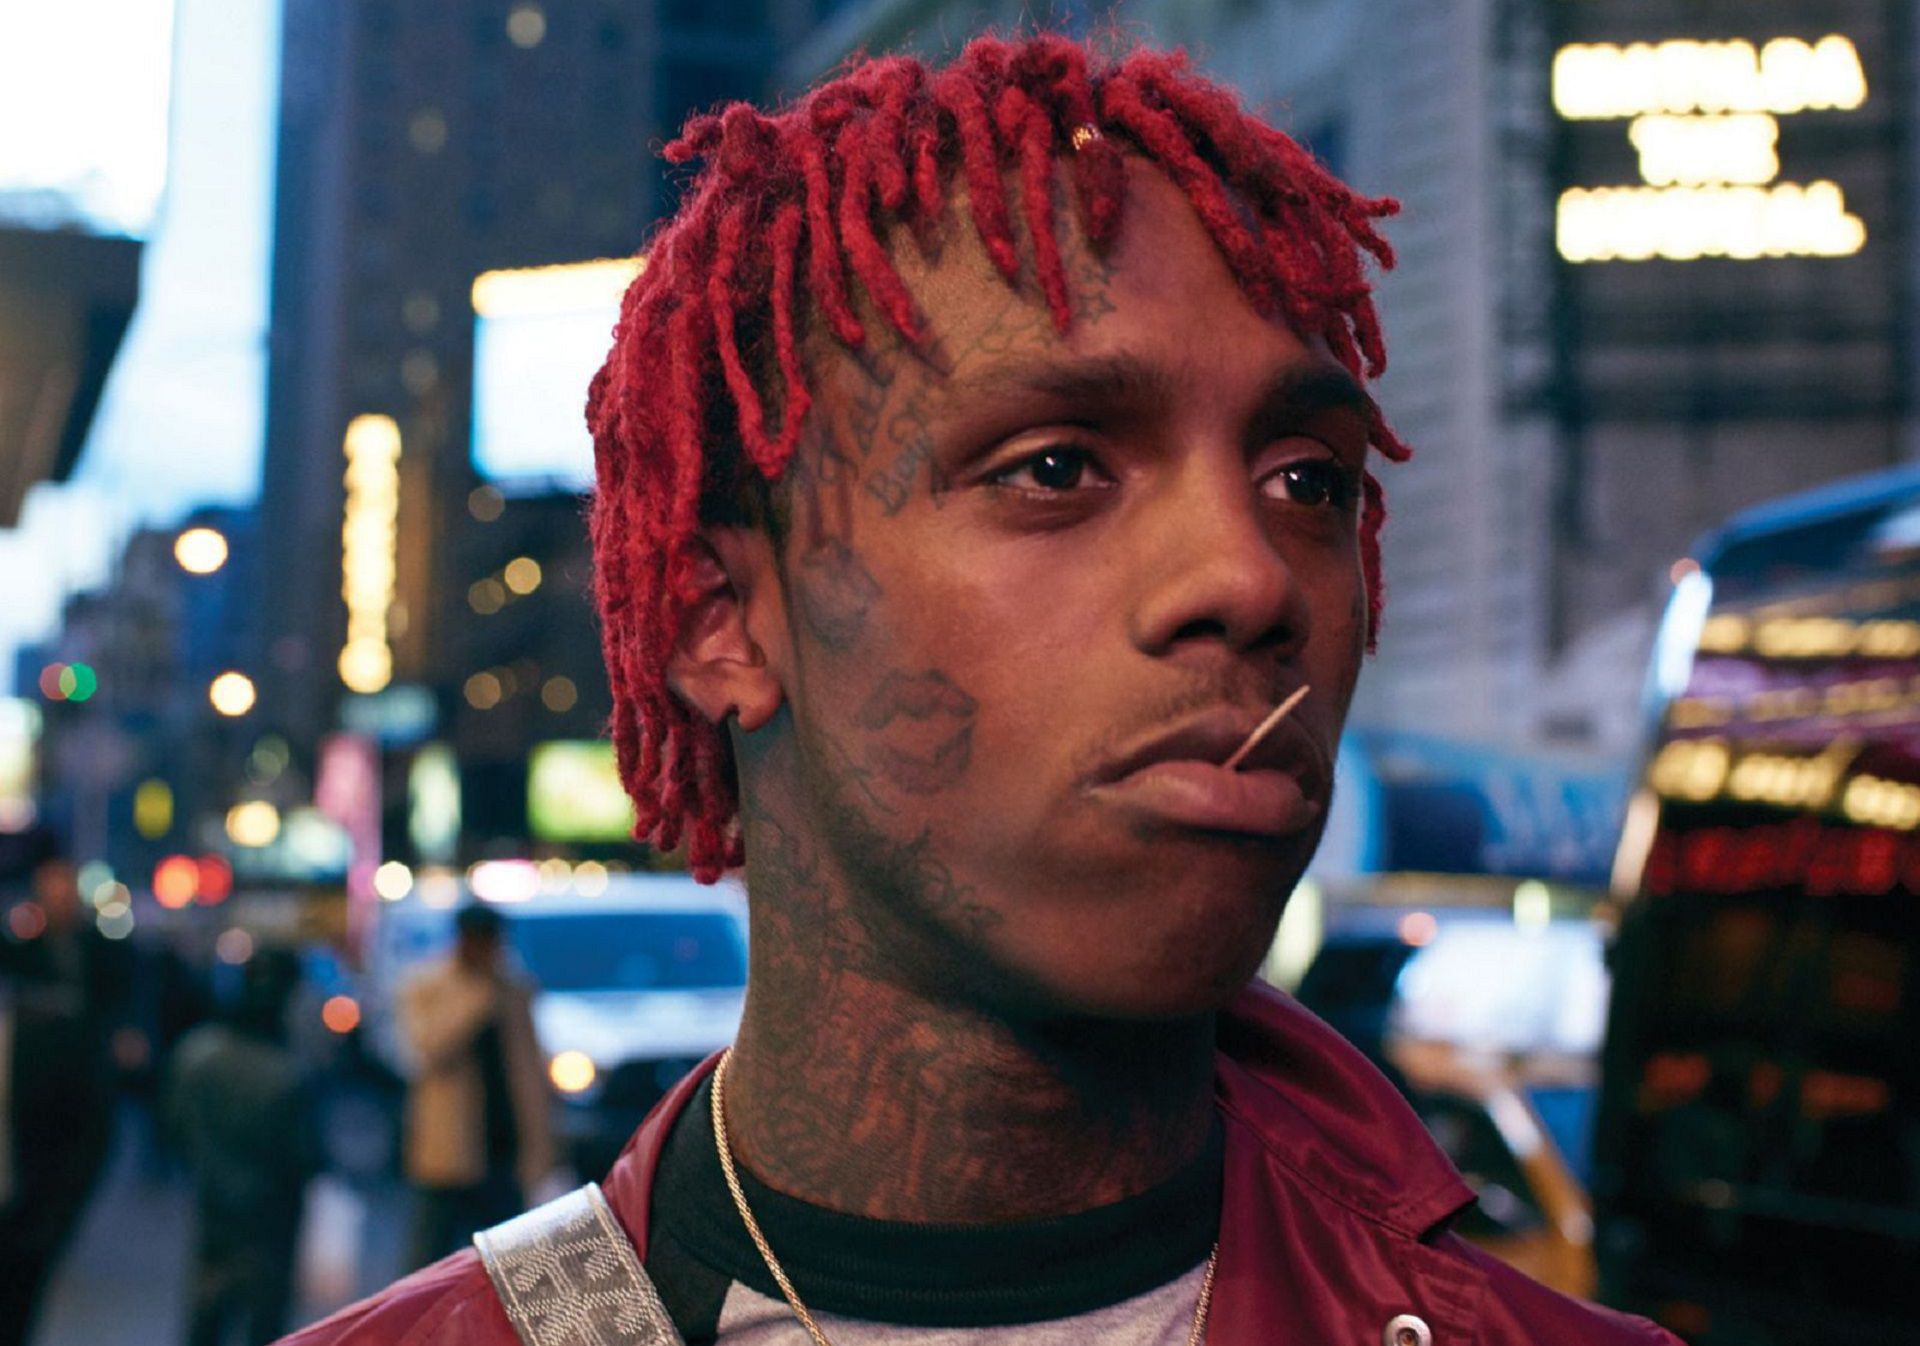 famous dex wallpaper,hair,hairstyle,dreadlocks,red,forehead